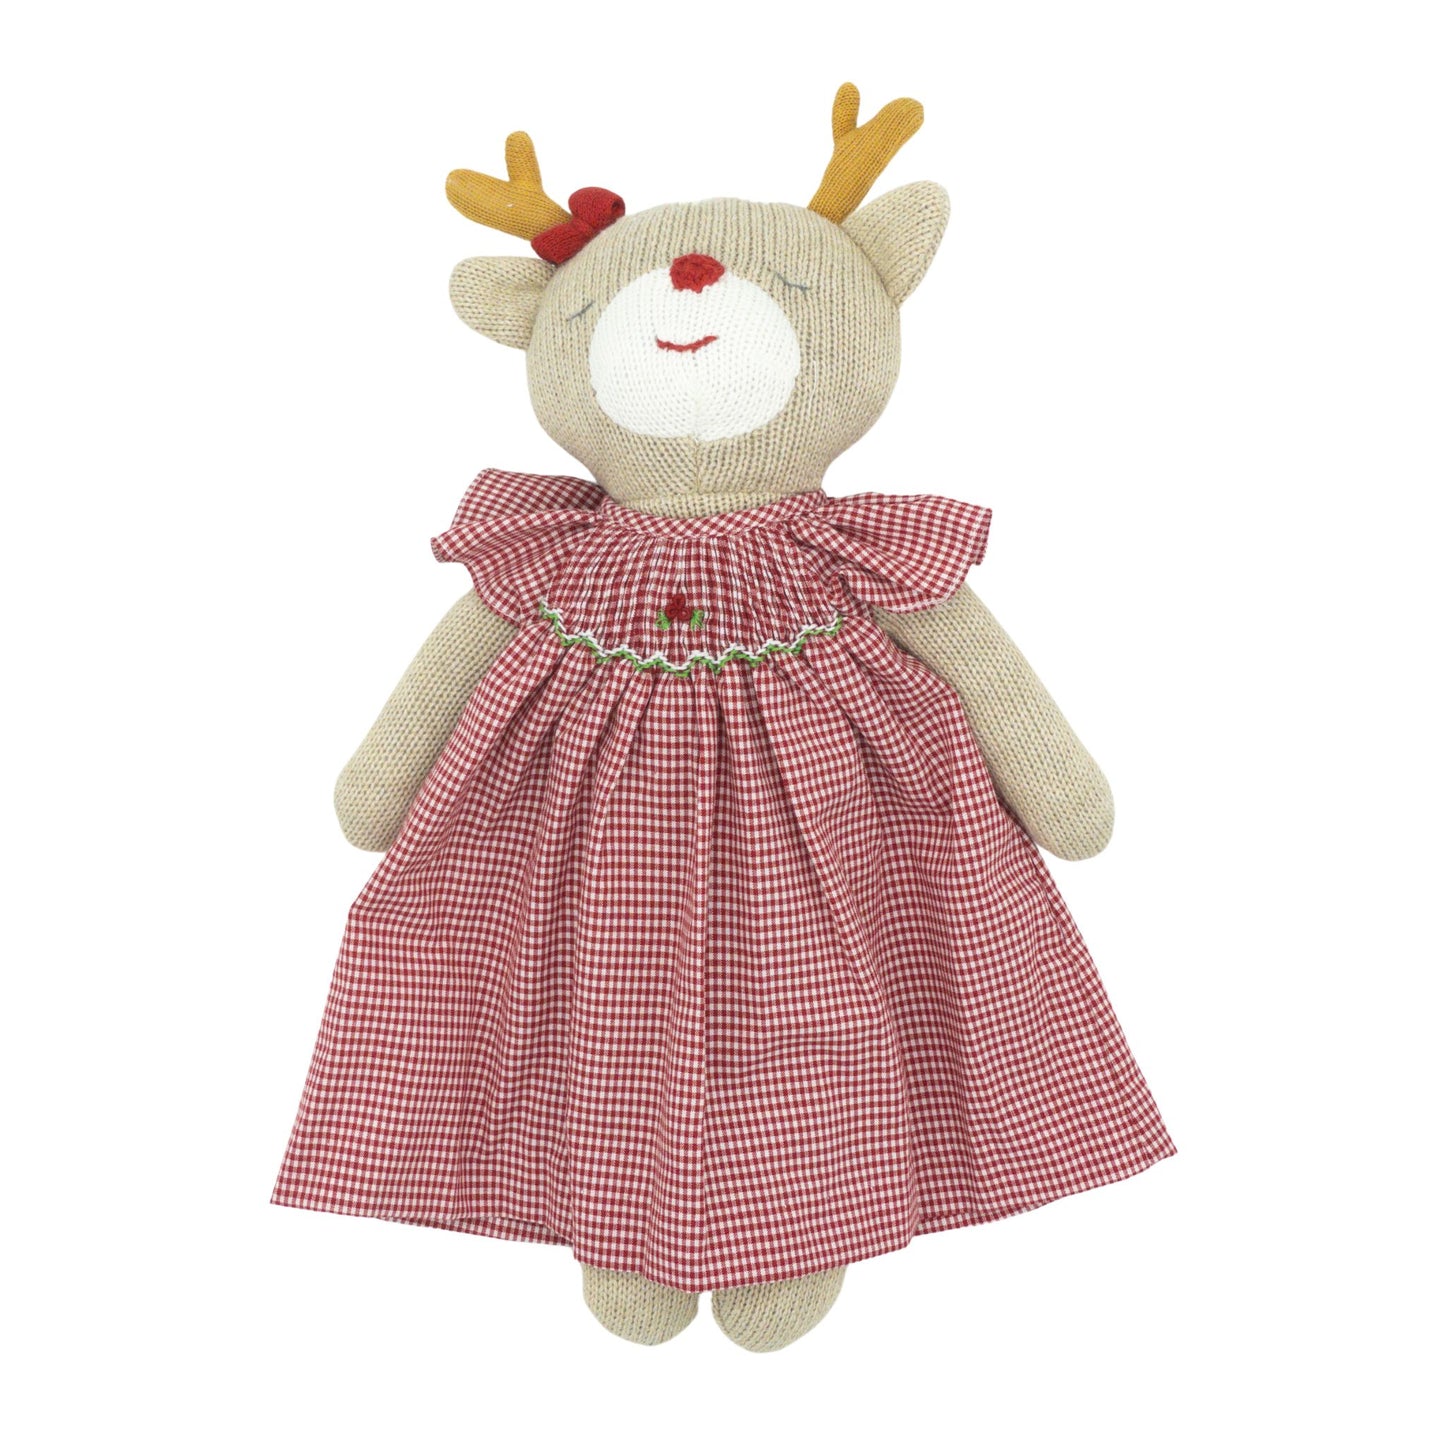 Knit Reindeer Doll with Dress